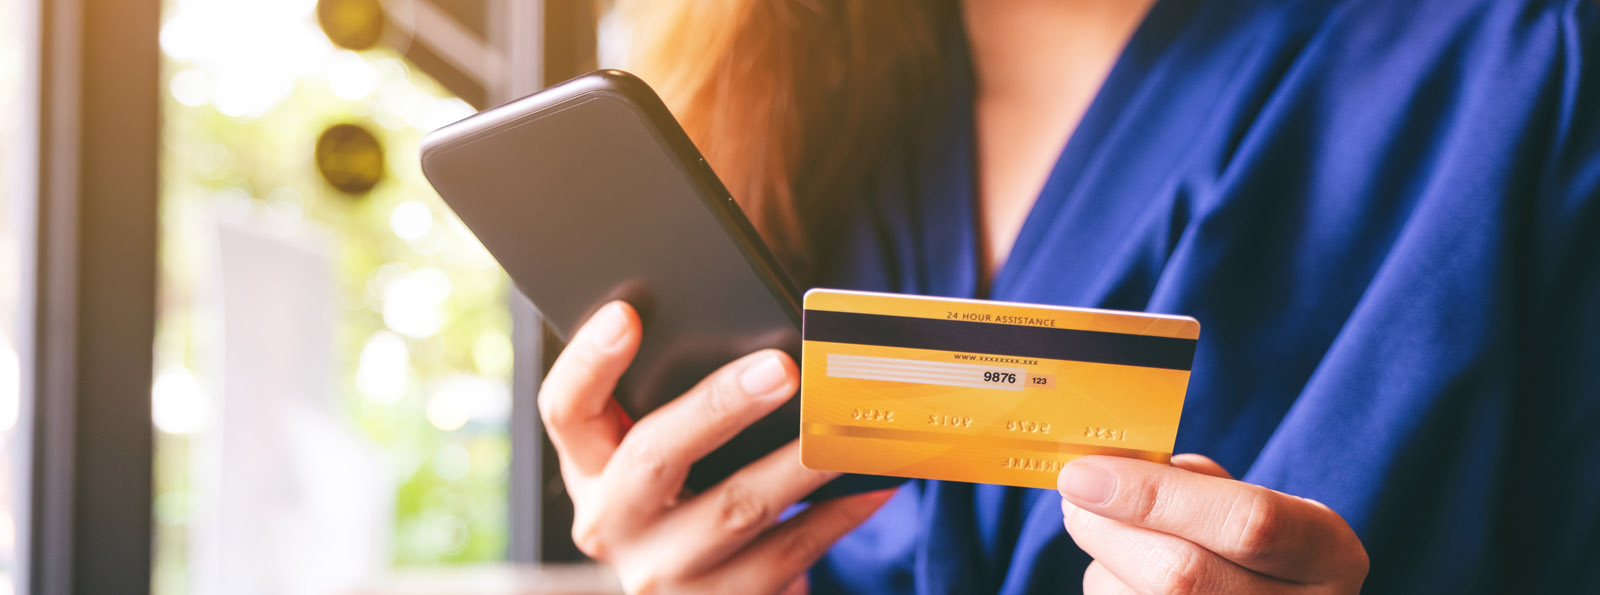 woman holding cellphone in one hand and credit card in the other